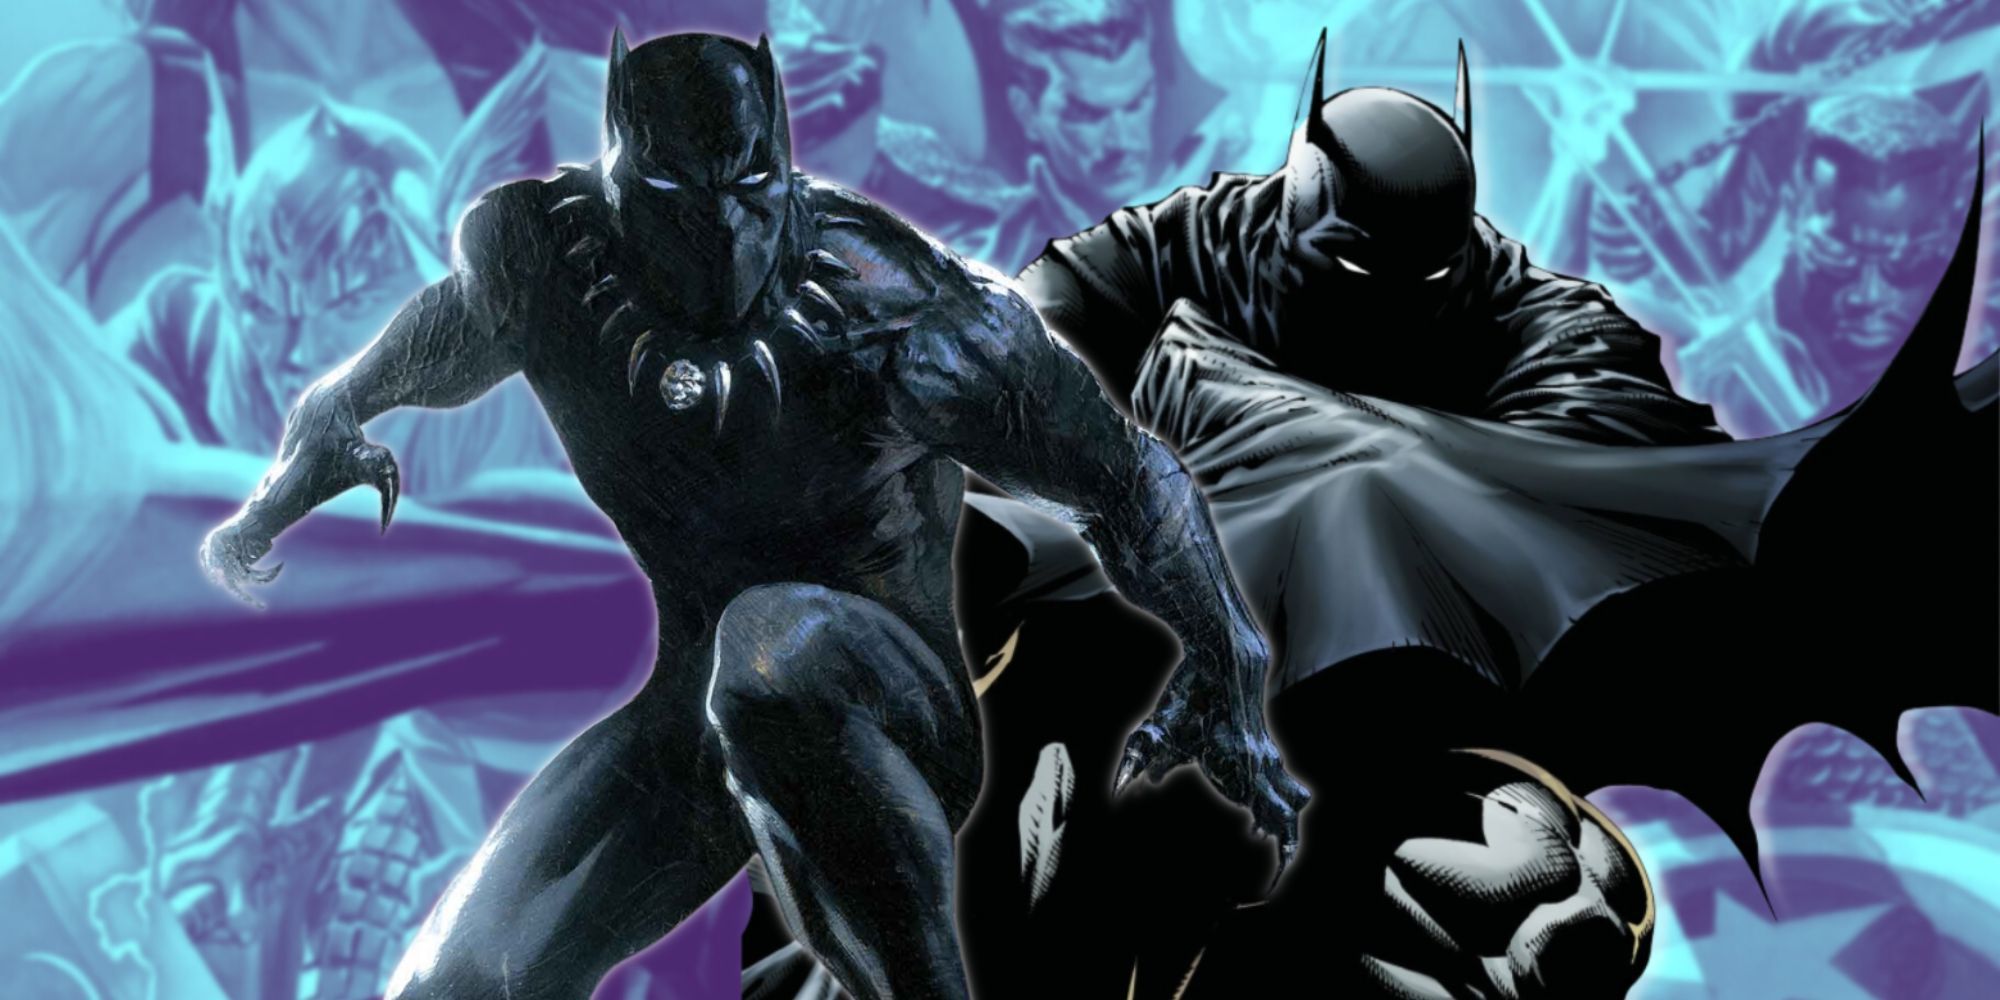 Black Panther Just Recreated Batman's Tower of Babel